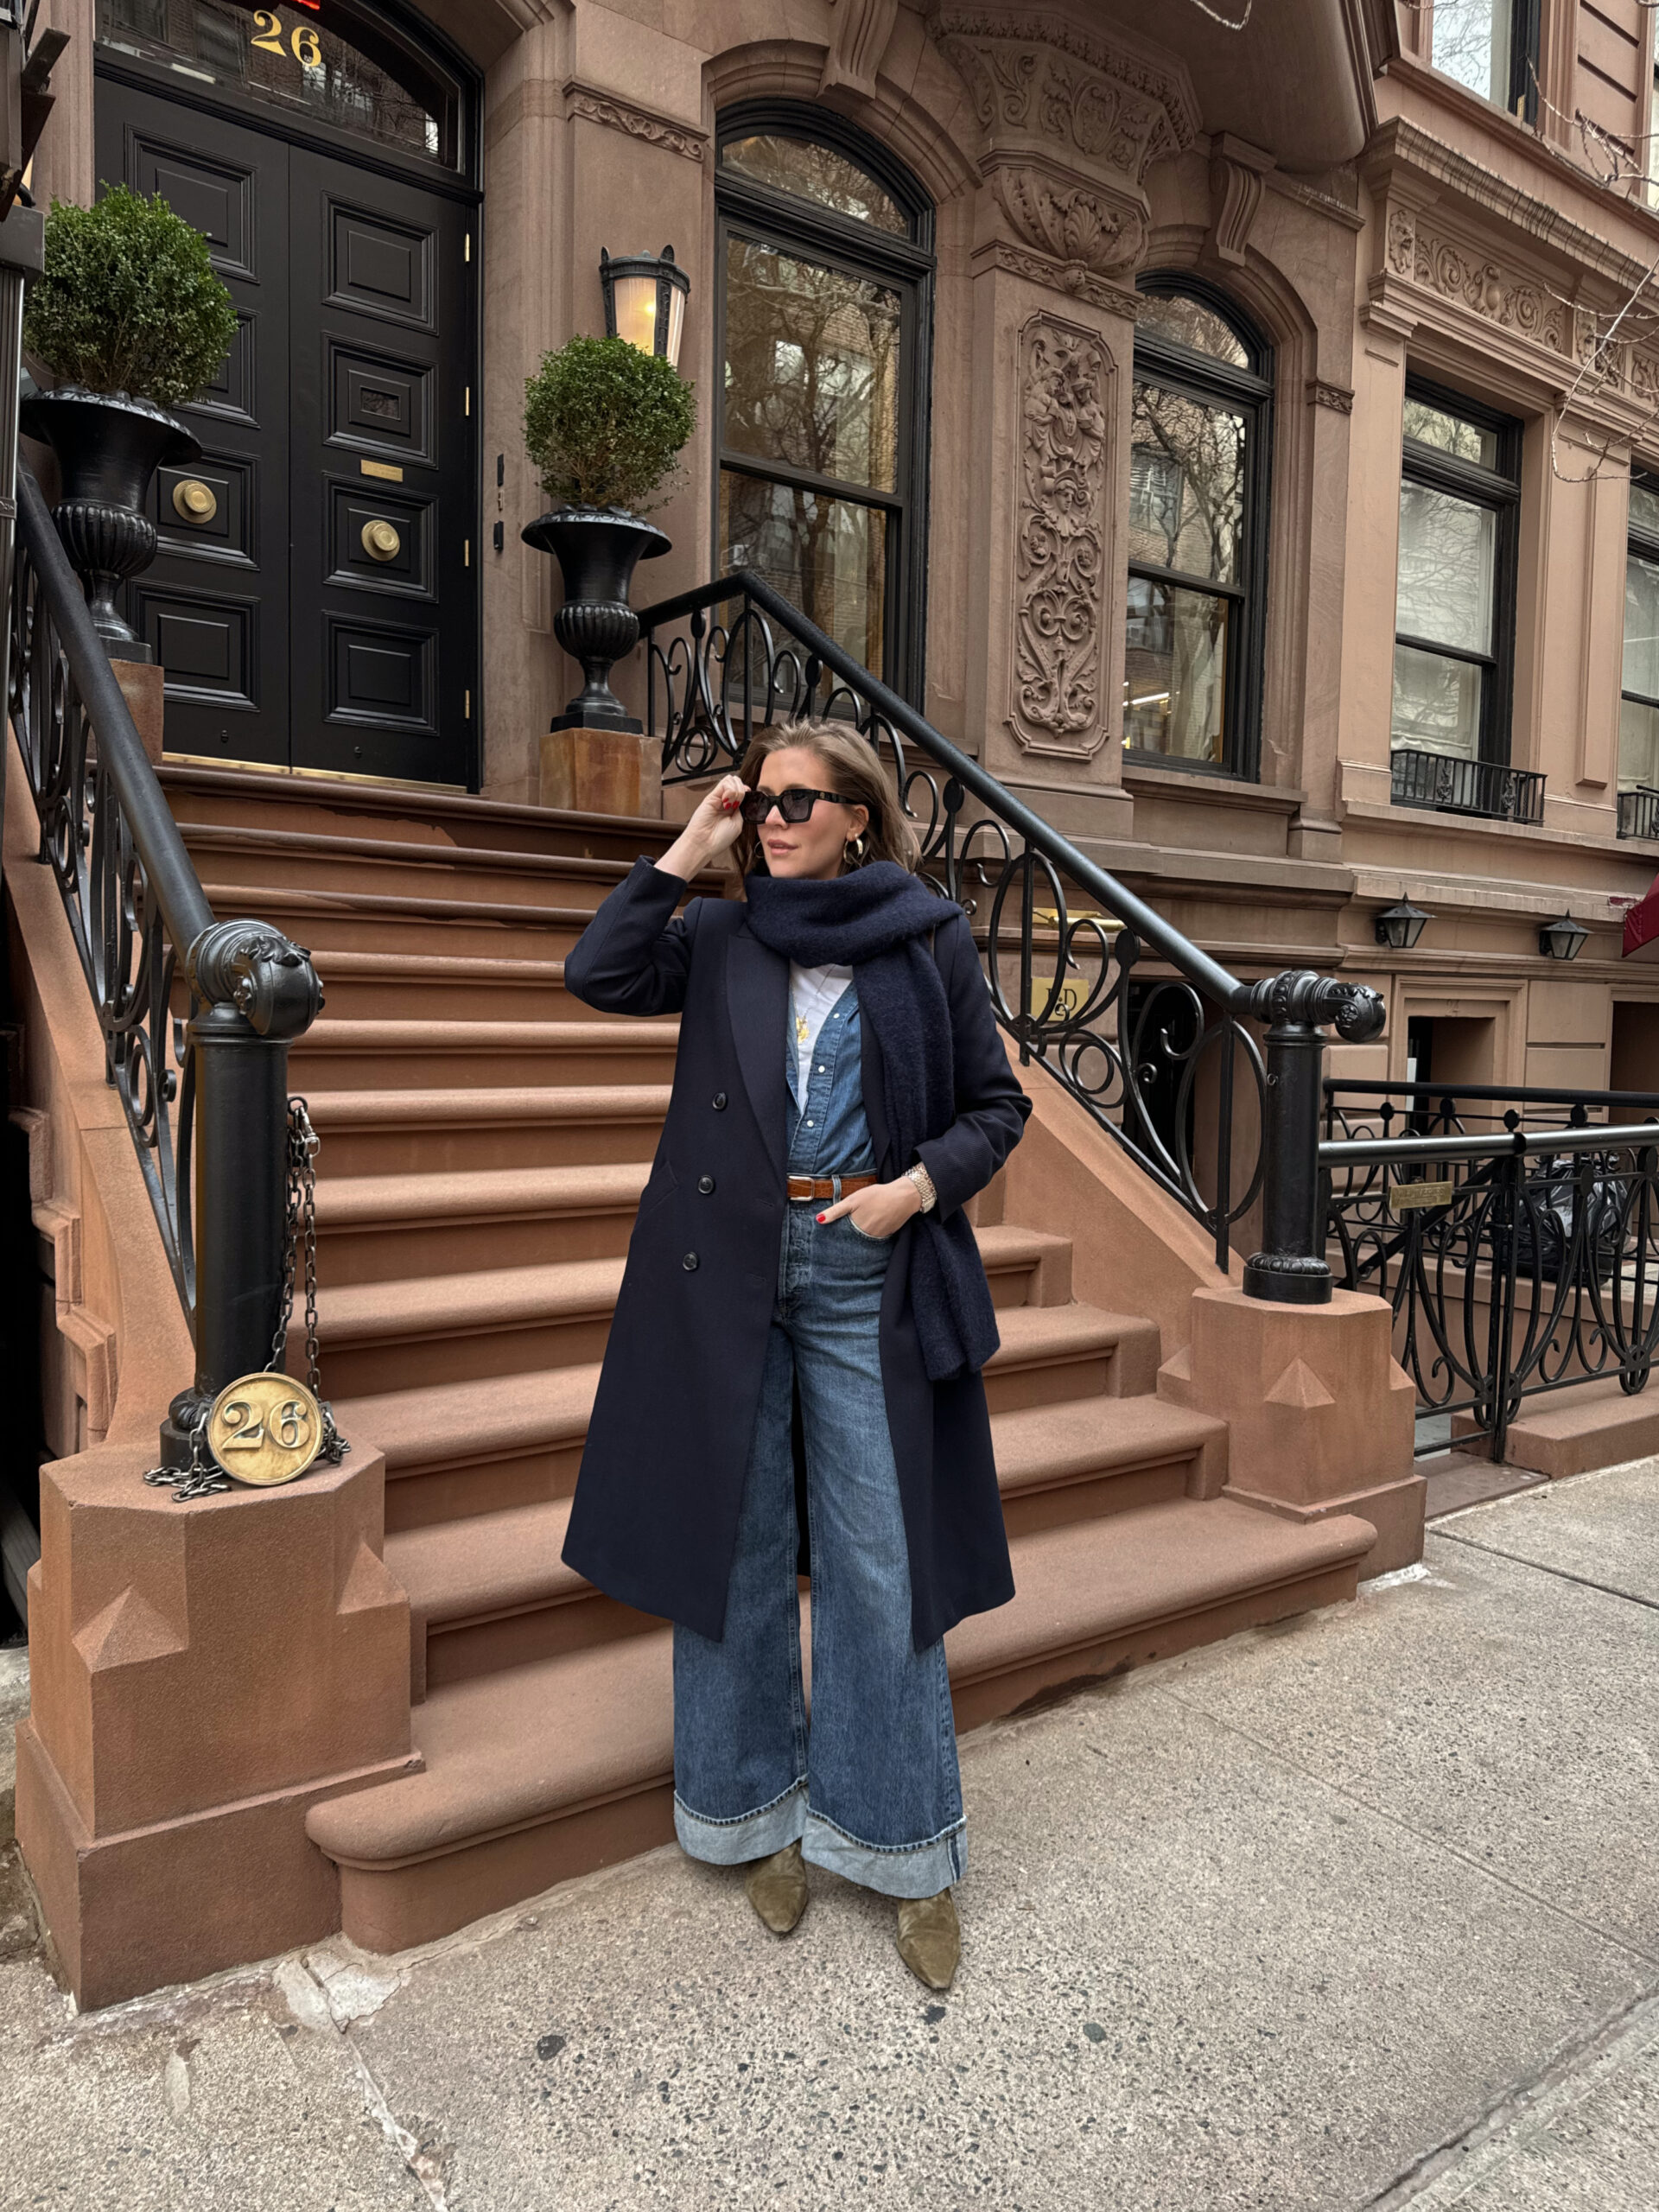 Anna wearing a long dark colored peacoat and jeans in front of New York City stoop.